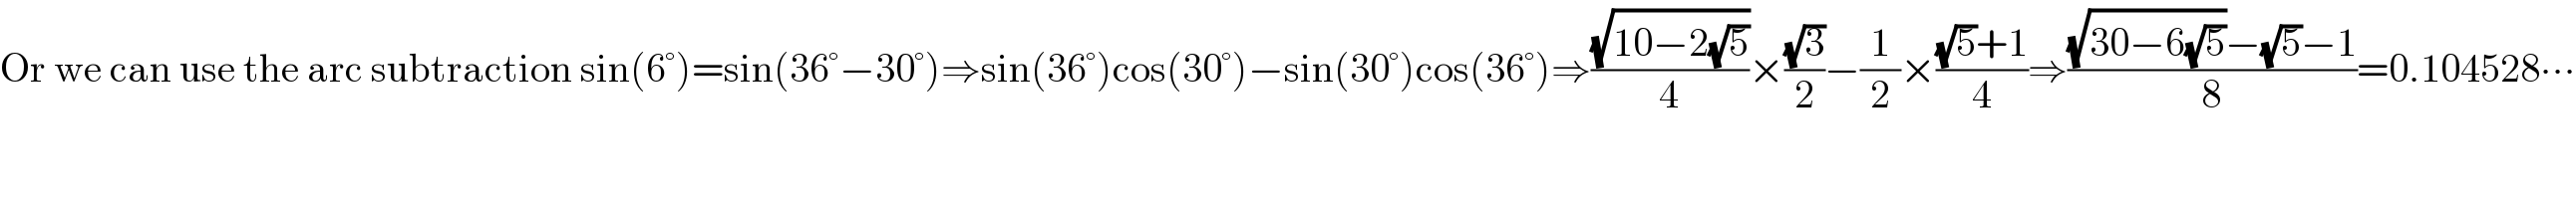 Or we can use the arc subtraction sin(6°)=sin(36°−30°)⇒sin(36°)cos(30°)−sin(30°)cos(36°)⇒((√(10−2(√5)))/4)×((√3)/2)−(1/2)×(((√5)+1)/4)⇒(((√(30−6(√5)))−(√5)−1)/8)=0.104528∙∙∙  